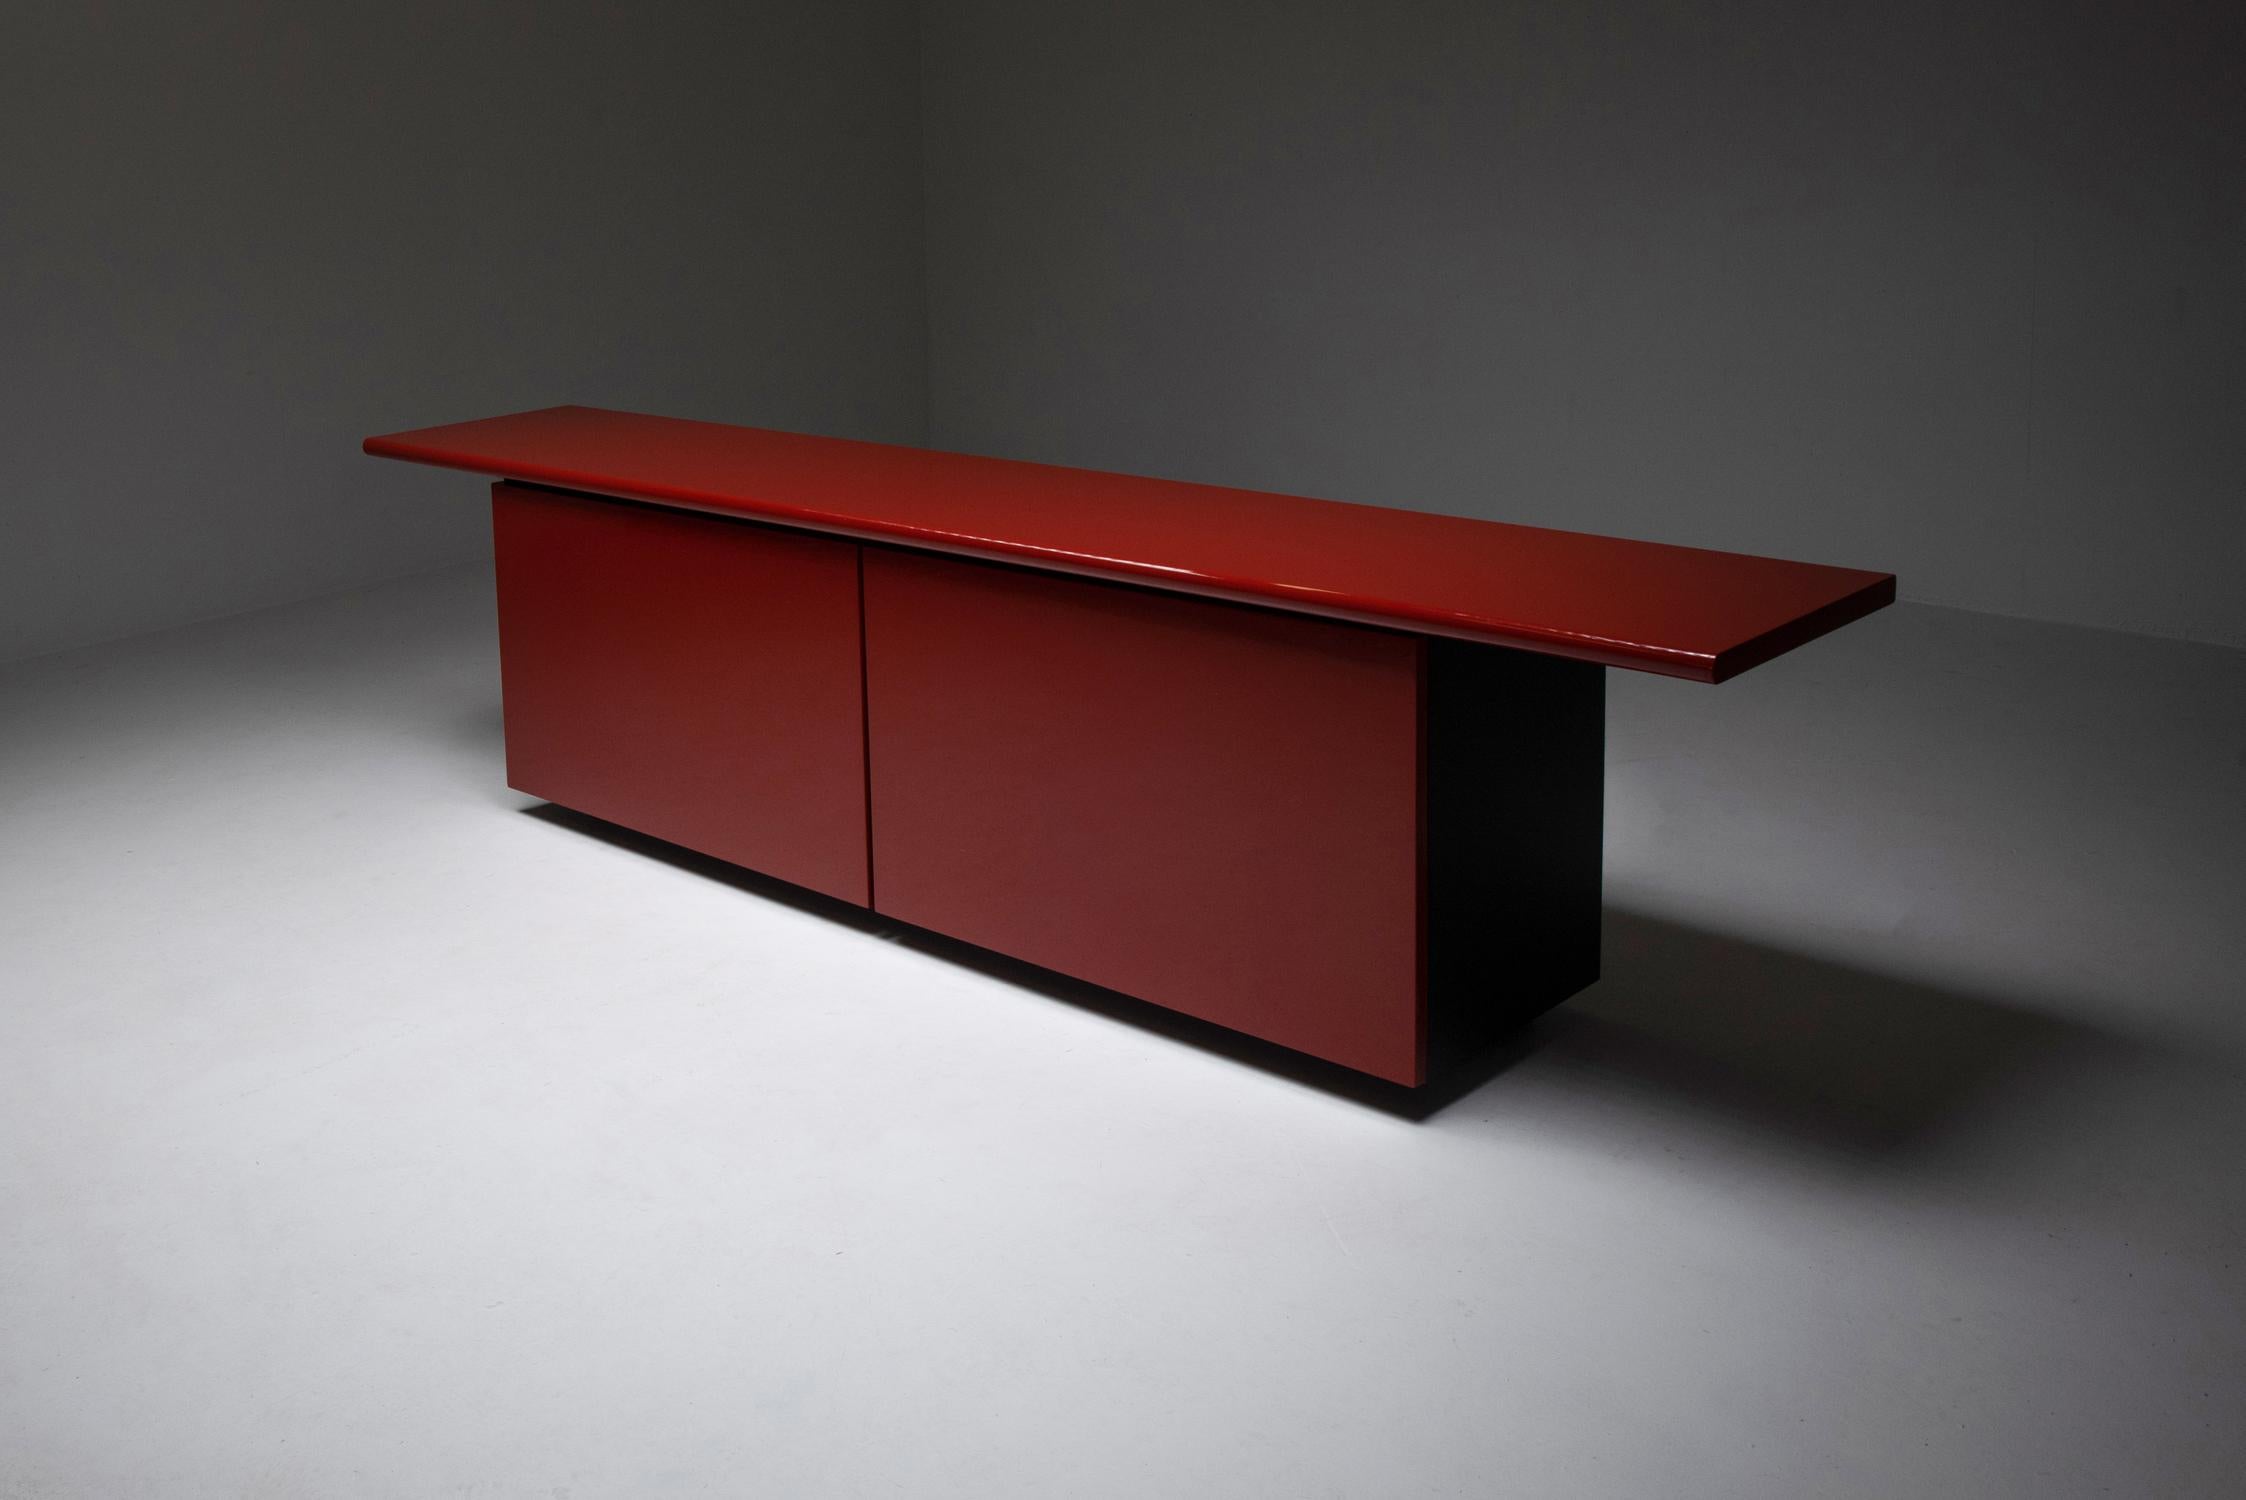 Acerbis, Giotto Stoppino, red lacquer sideboard, Italy, 1977.

Postmodern storage piece in red lacquer. The top has a floating appearance because of it's oversize width. The genius in the design here is that the doors of the credenza slide open